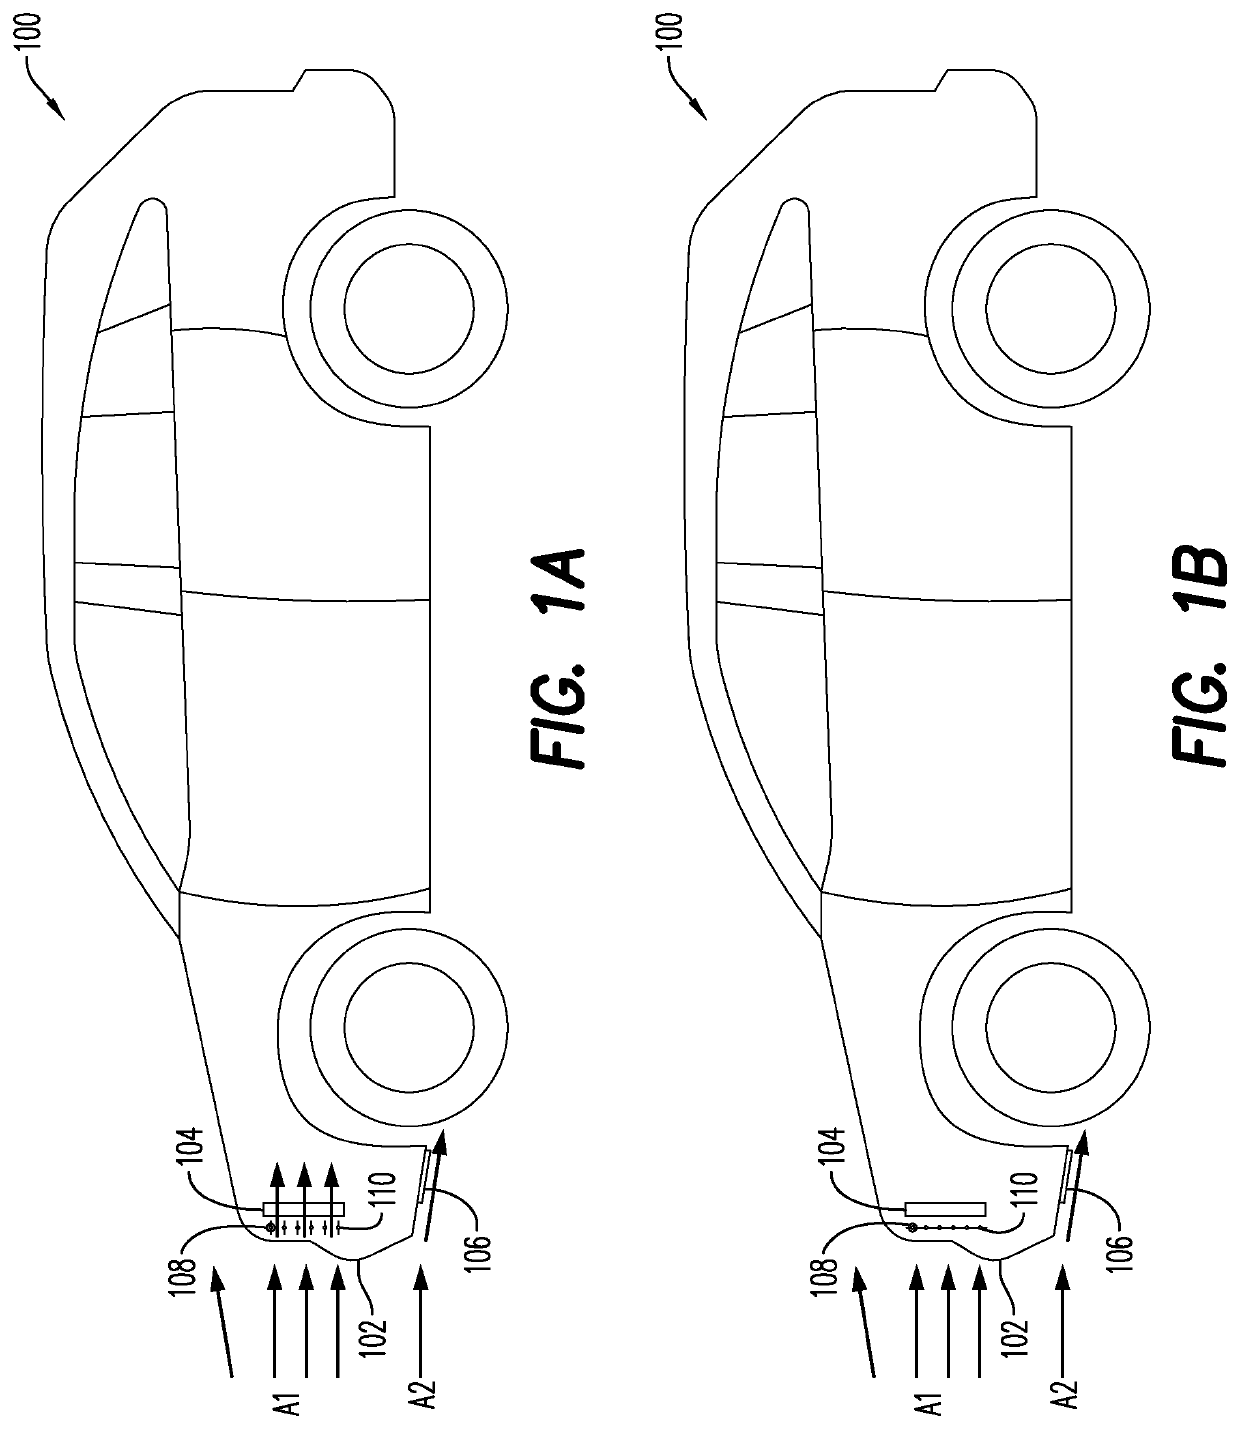 Heat transfer system for a vehicle